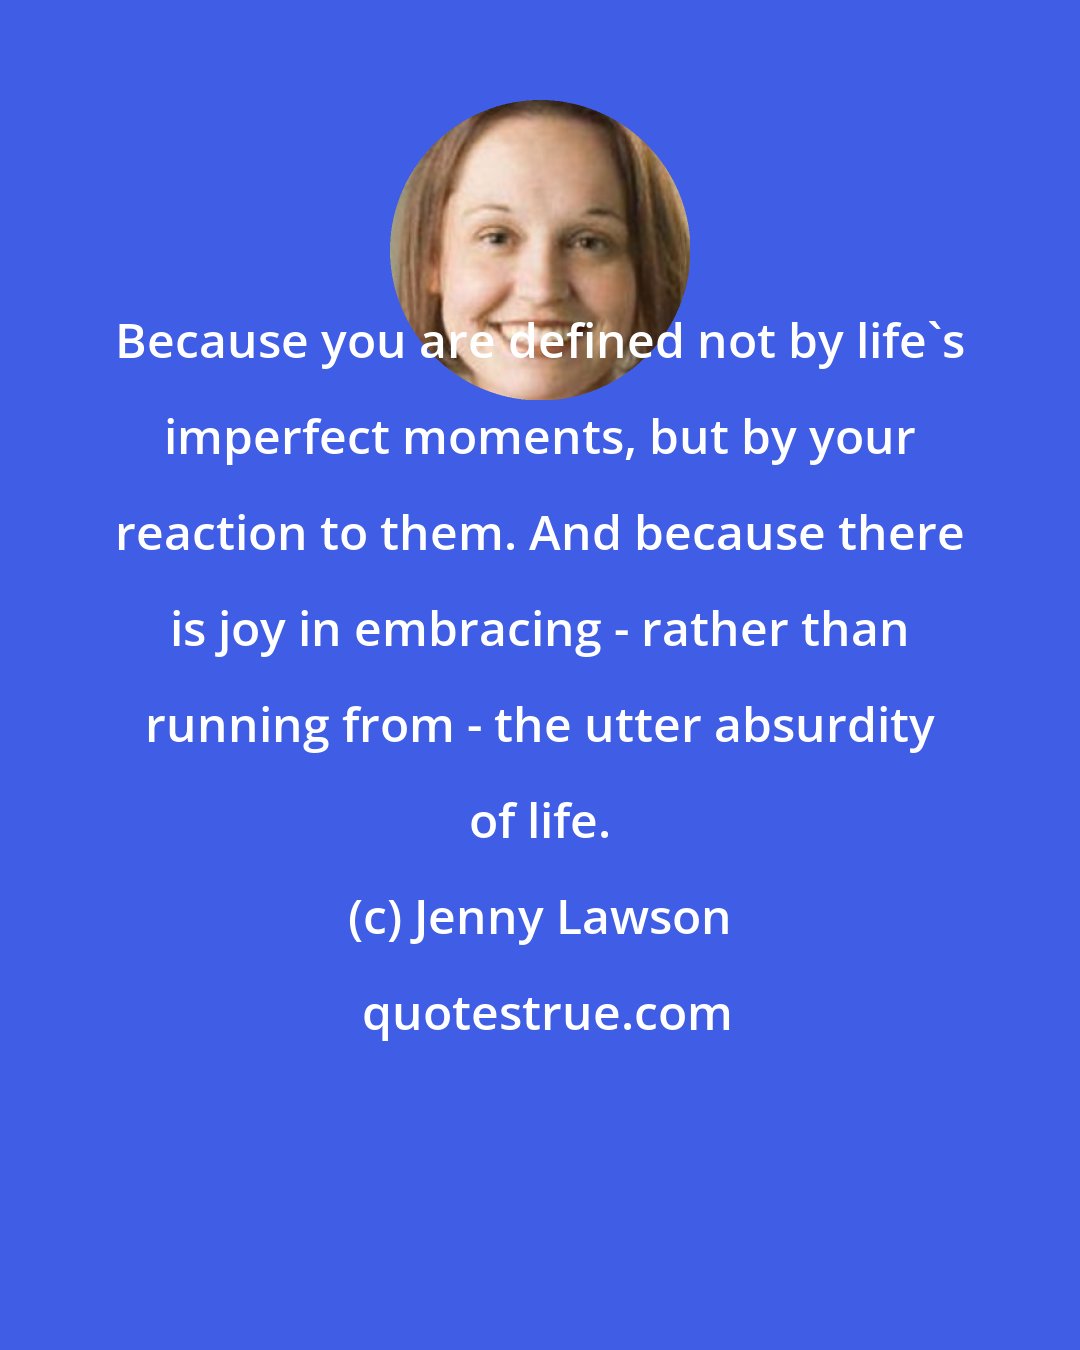 Jenny Lawson: Because you are defined not by life's imperfect moments, but by your reaction to them. And because there is joy in embracing - rather than running from - the utter absurdity of life.